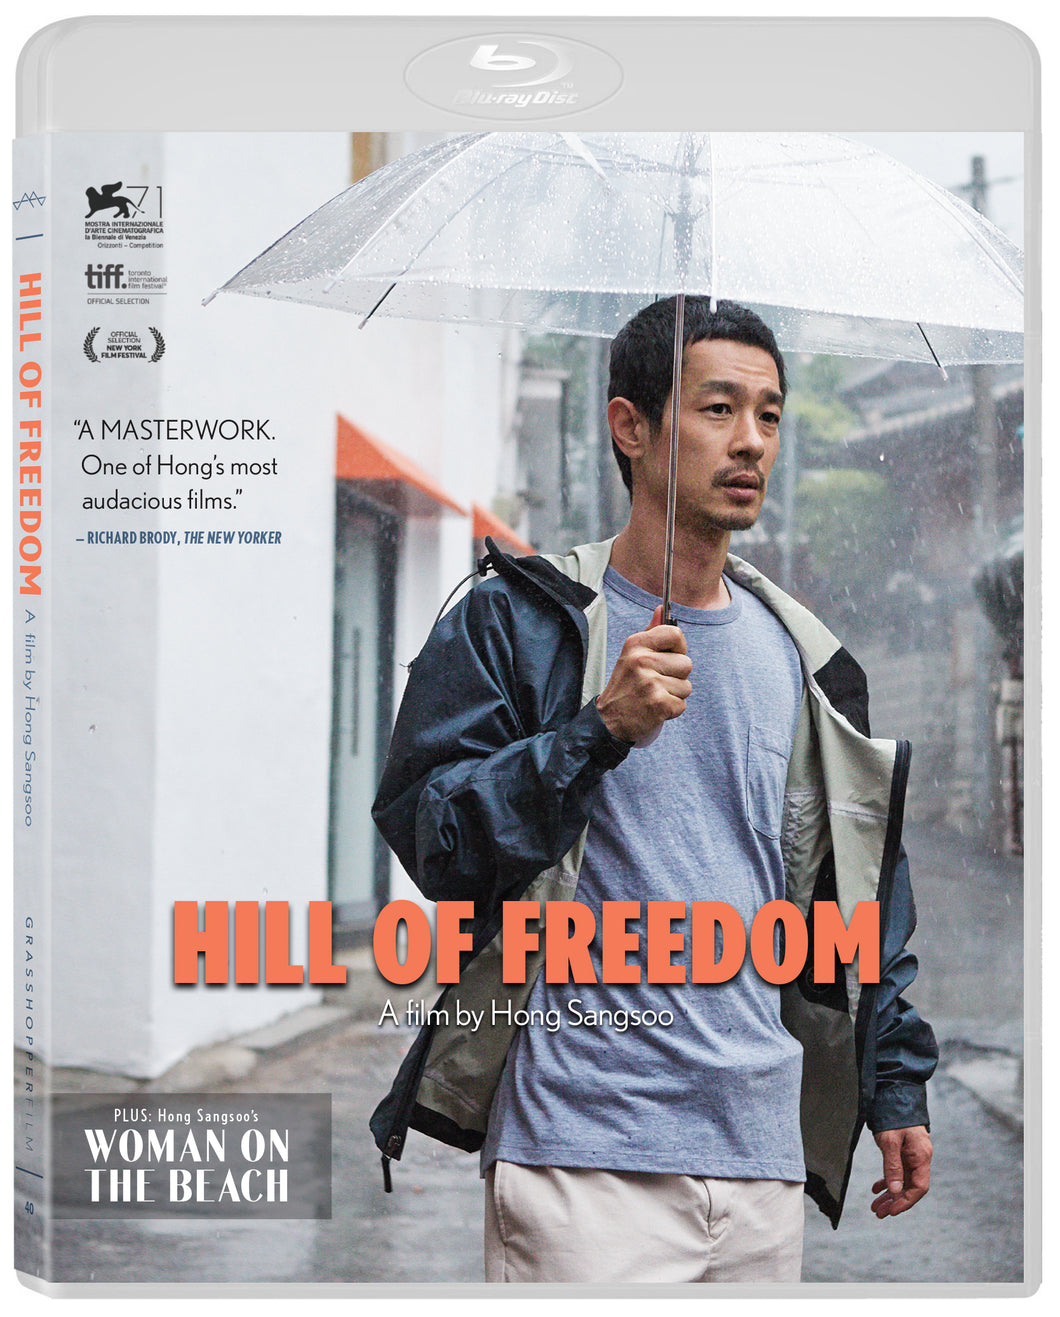 HILL OF FREEDOM & WOMAN ON THE BEACH [Blu-ray]